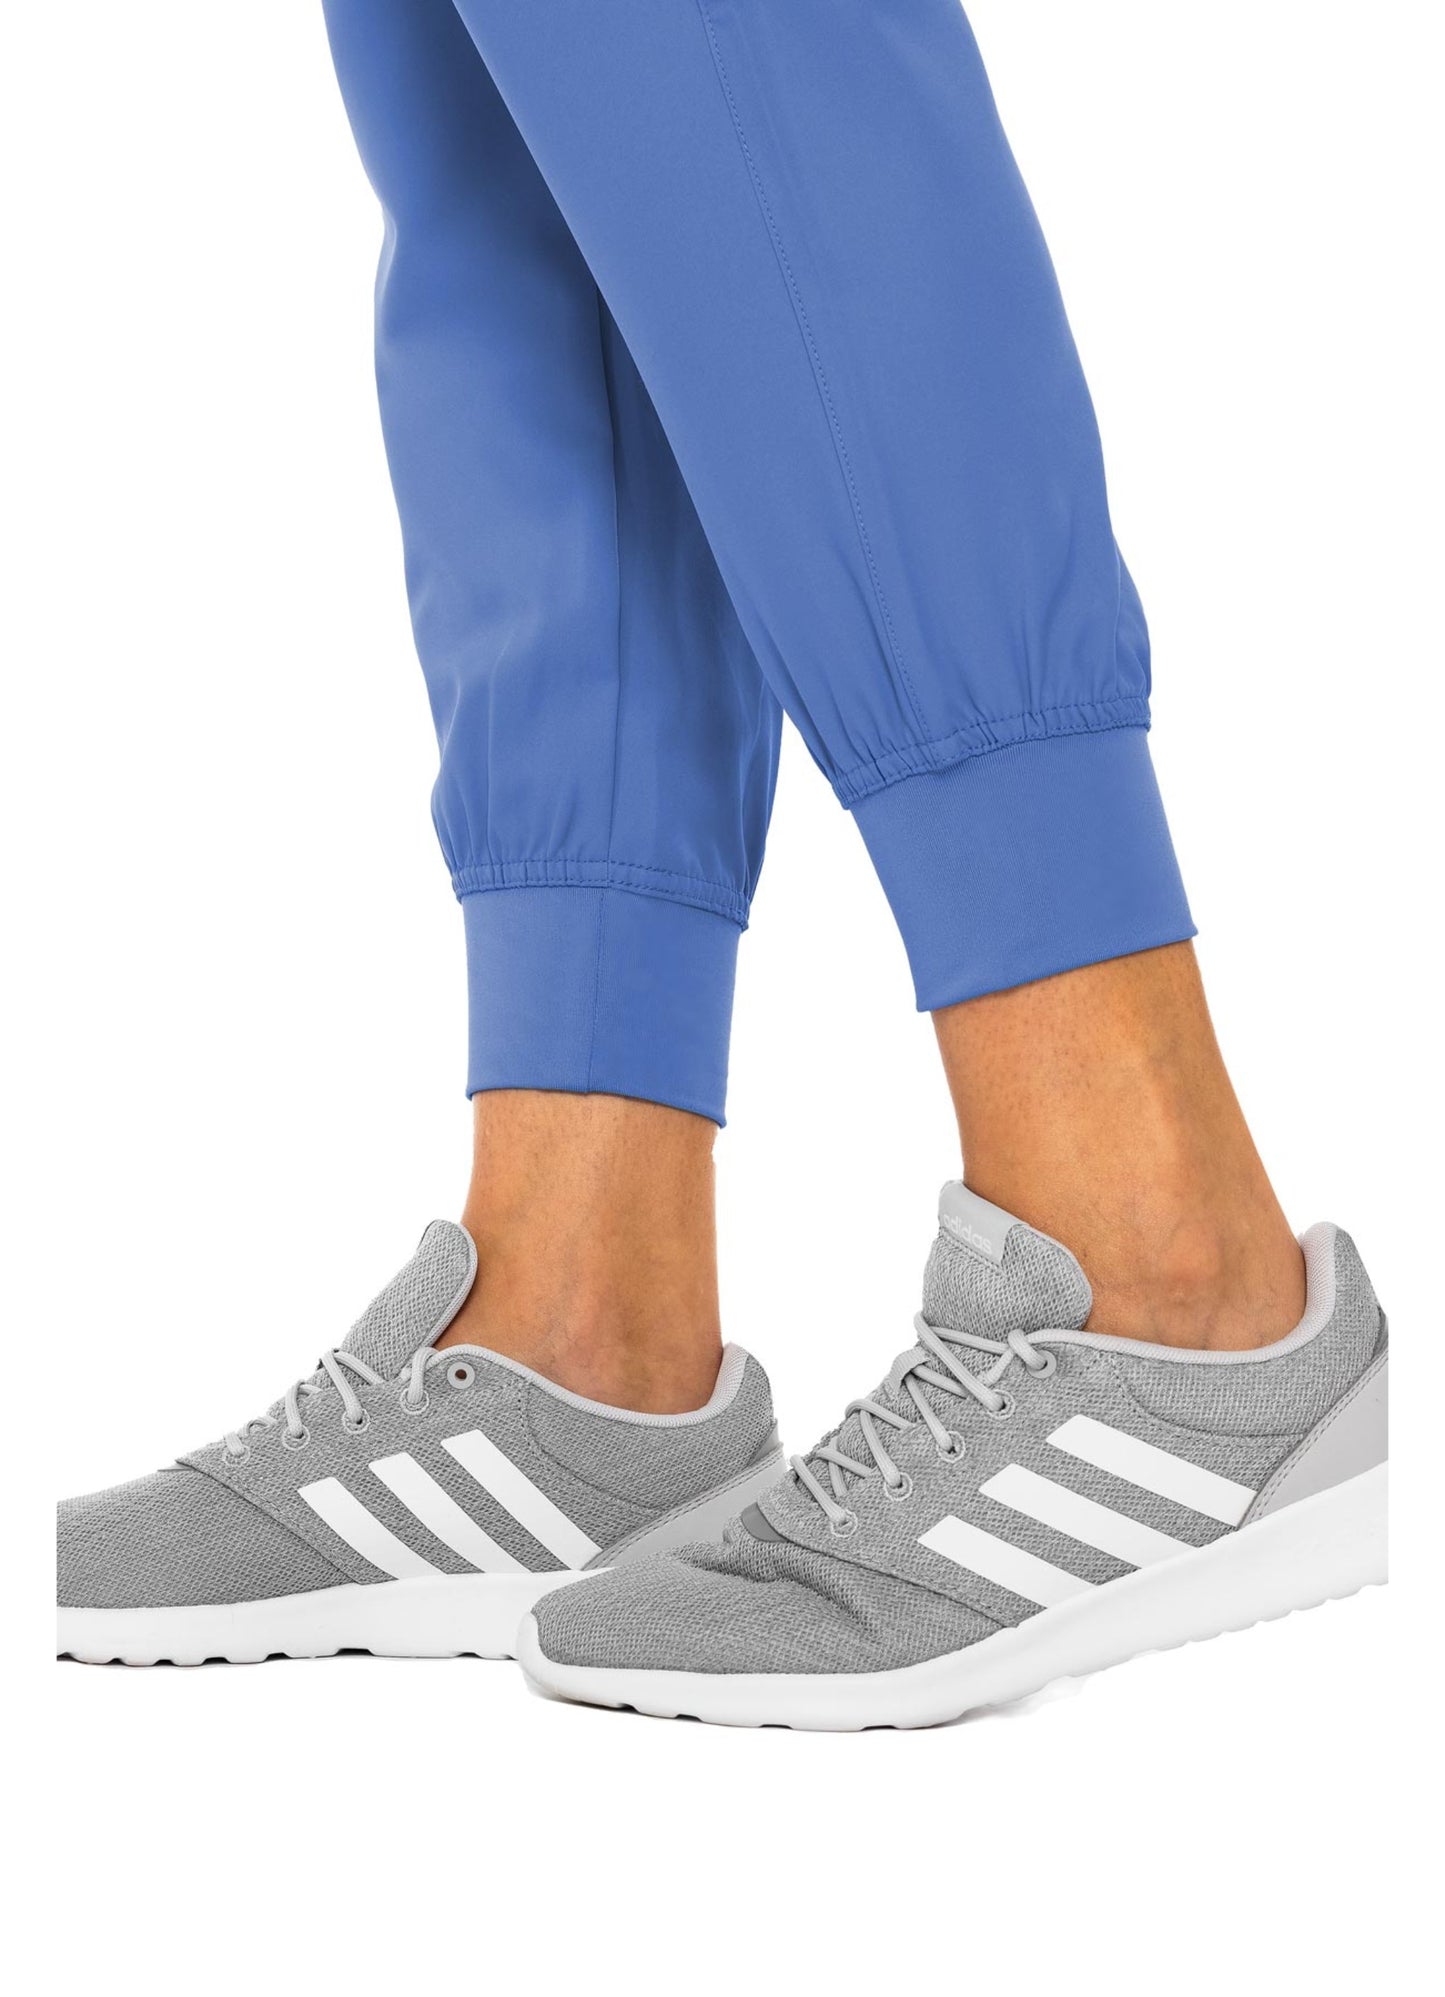 Med Couture Insight joggers